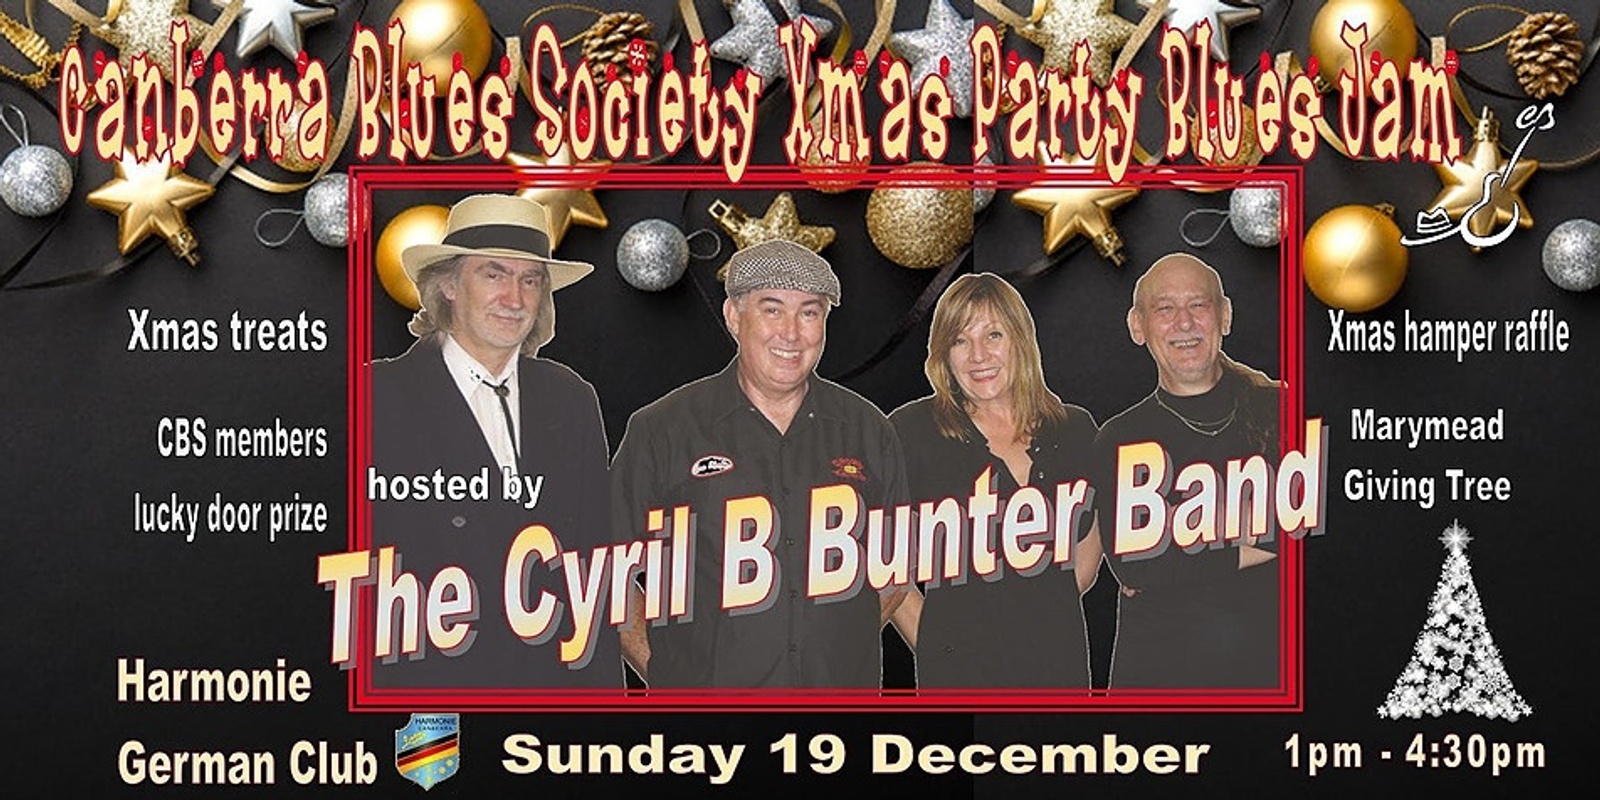 Banner image for CBS Xmas Party Blues Jam hosted by The Cyril B Bunter Band